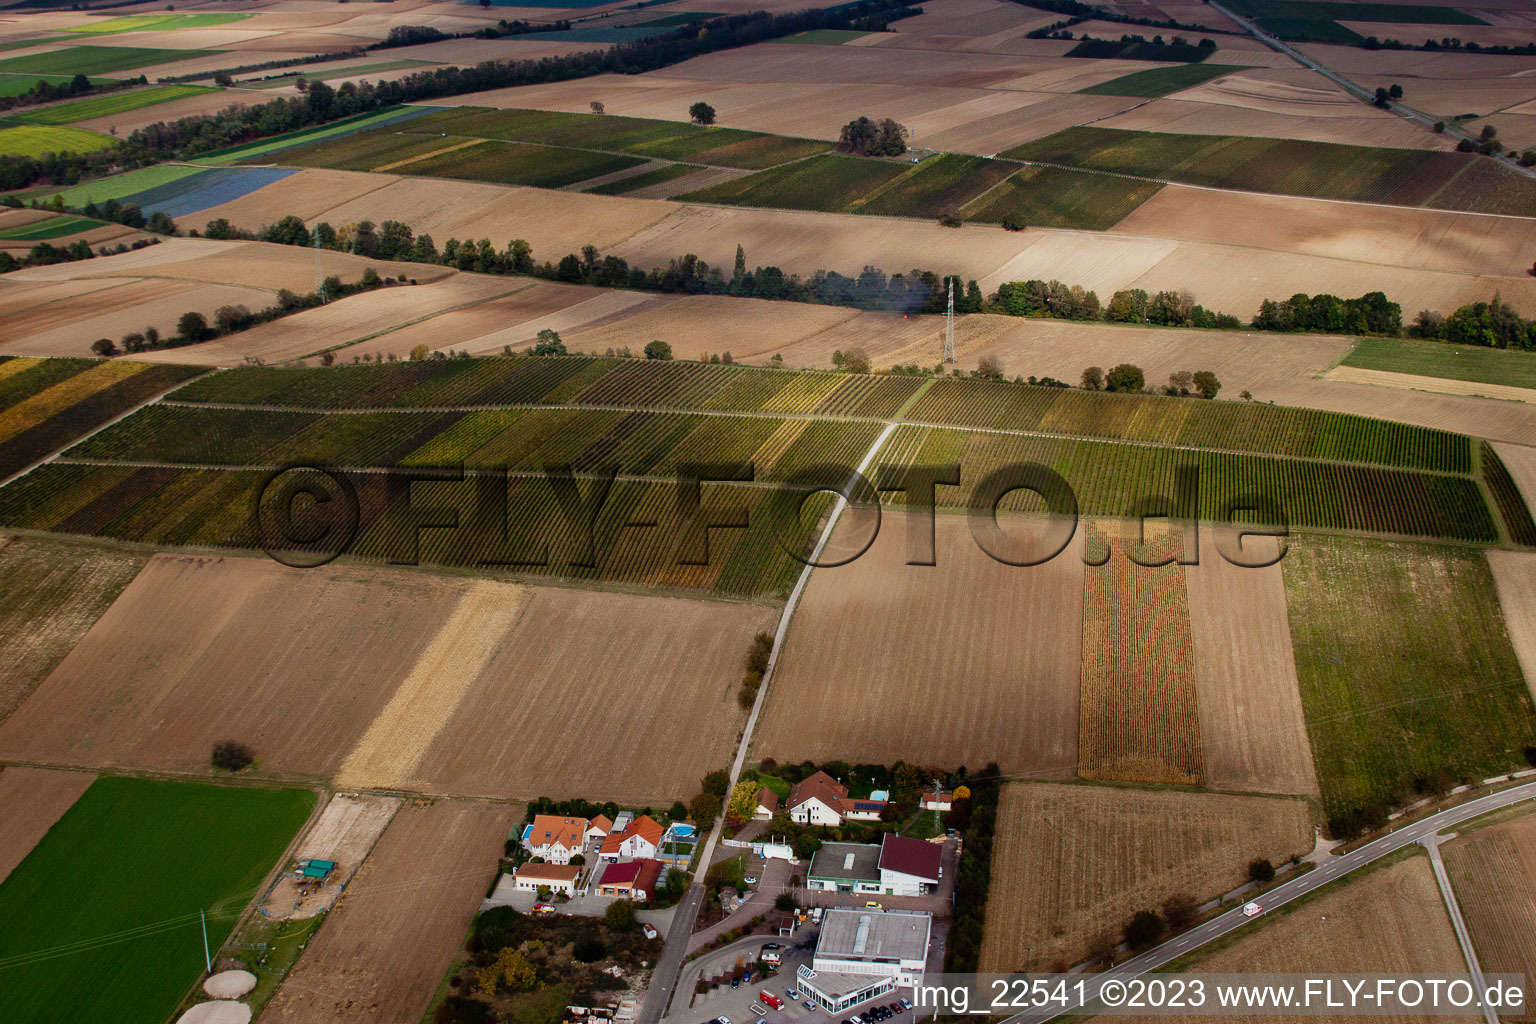 Aerial photograpy of Vineyards between Freckenfeld and Winden in Freckenfeld in the state Rhineland-Palatinate, Germany